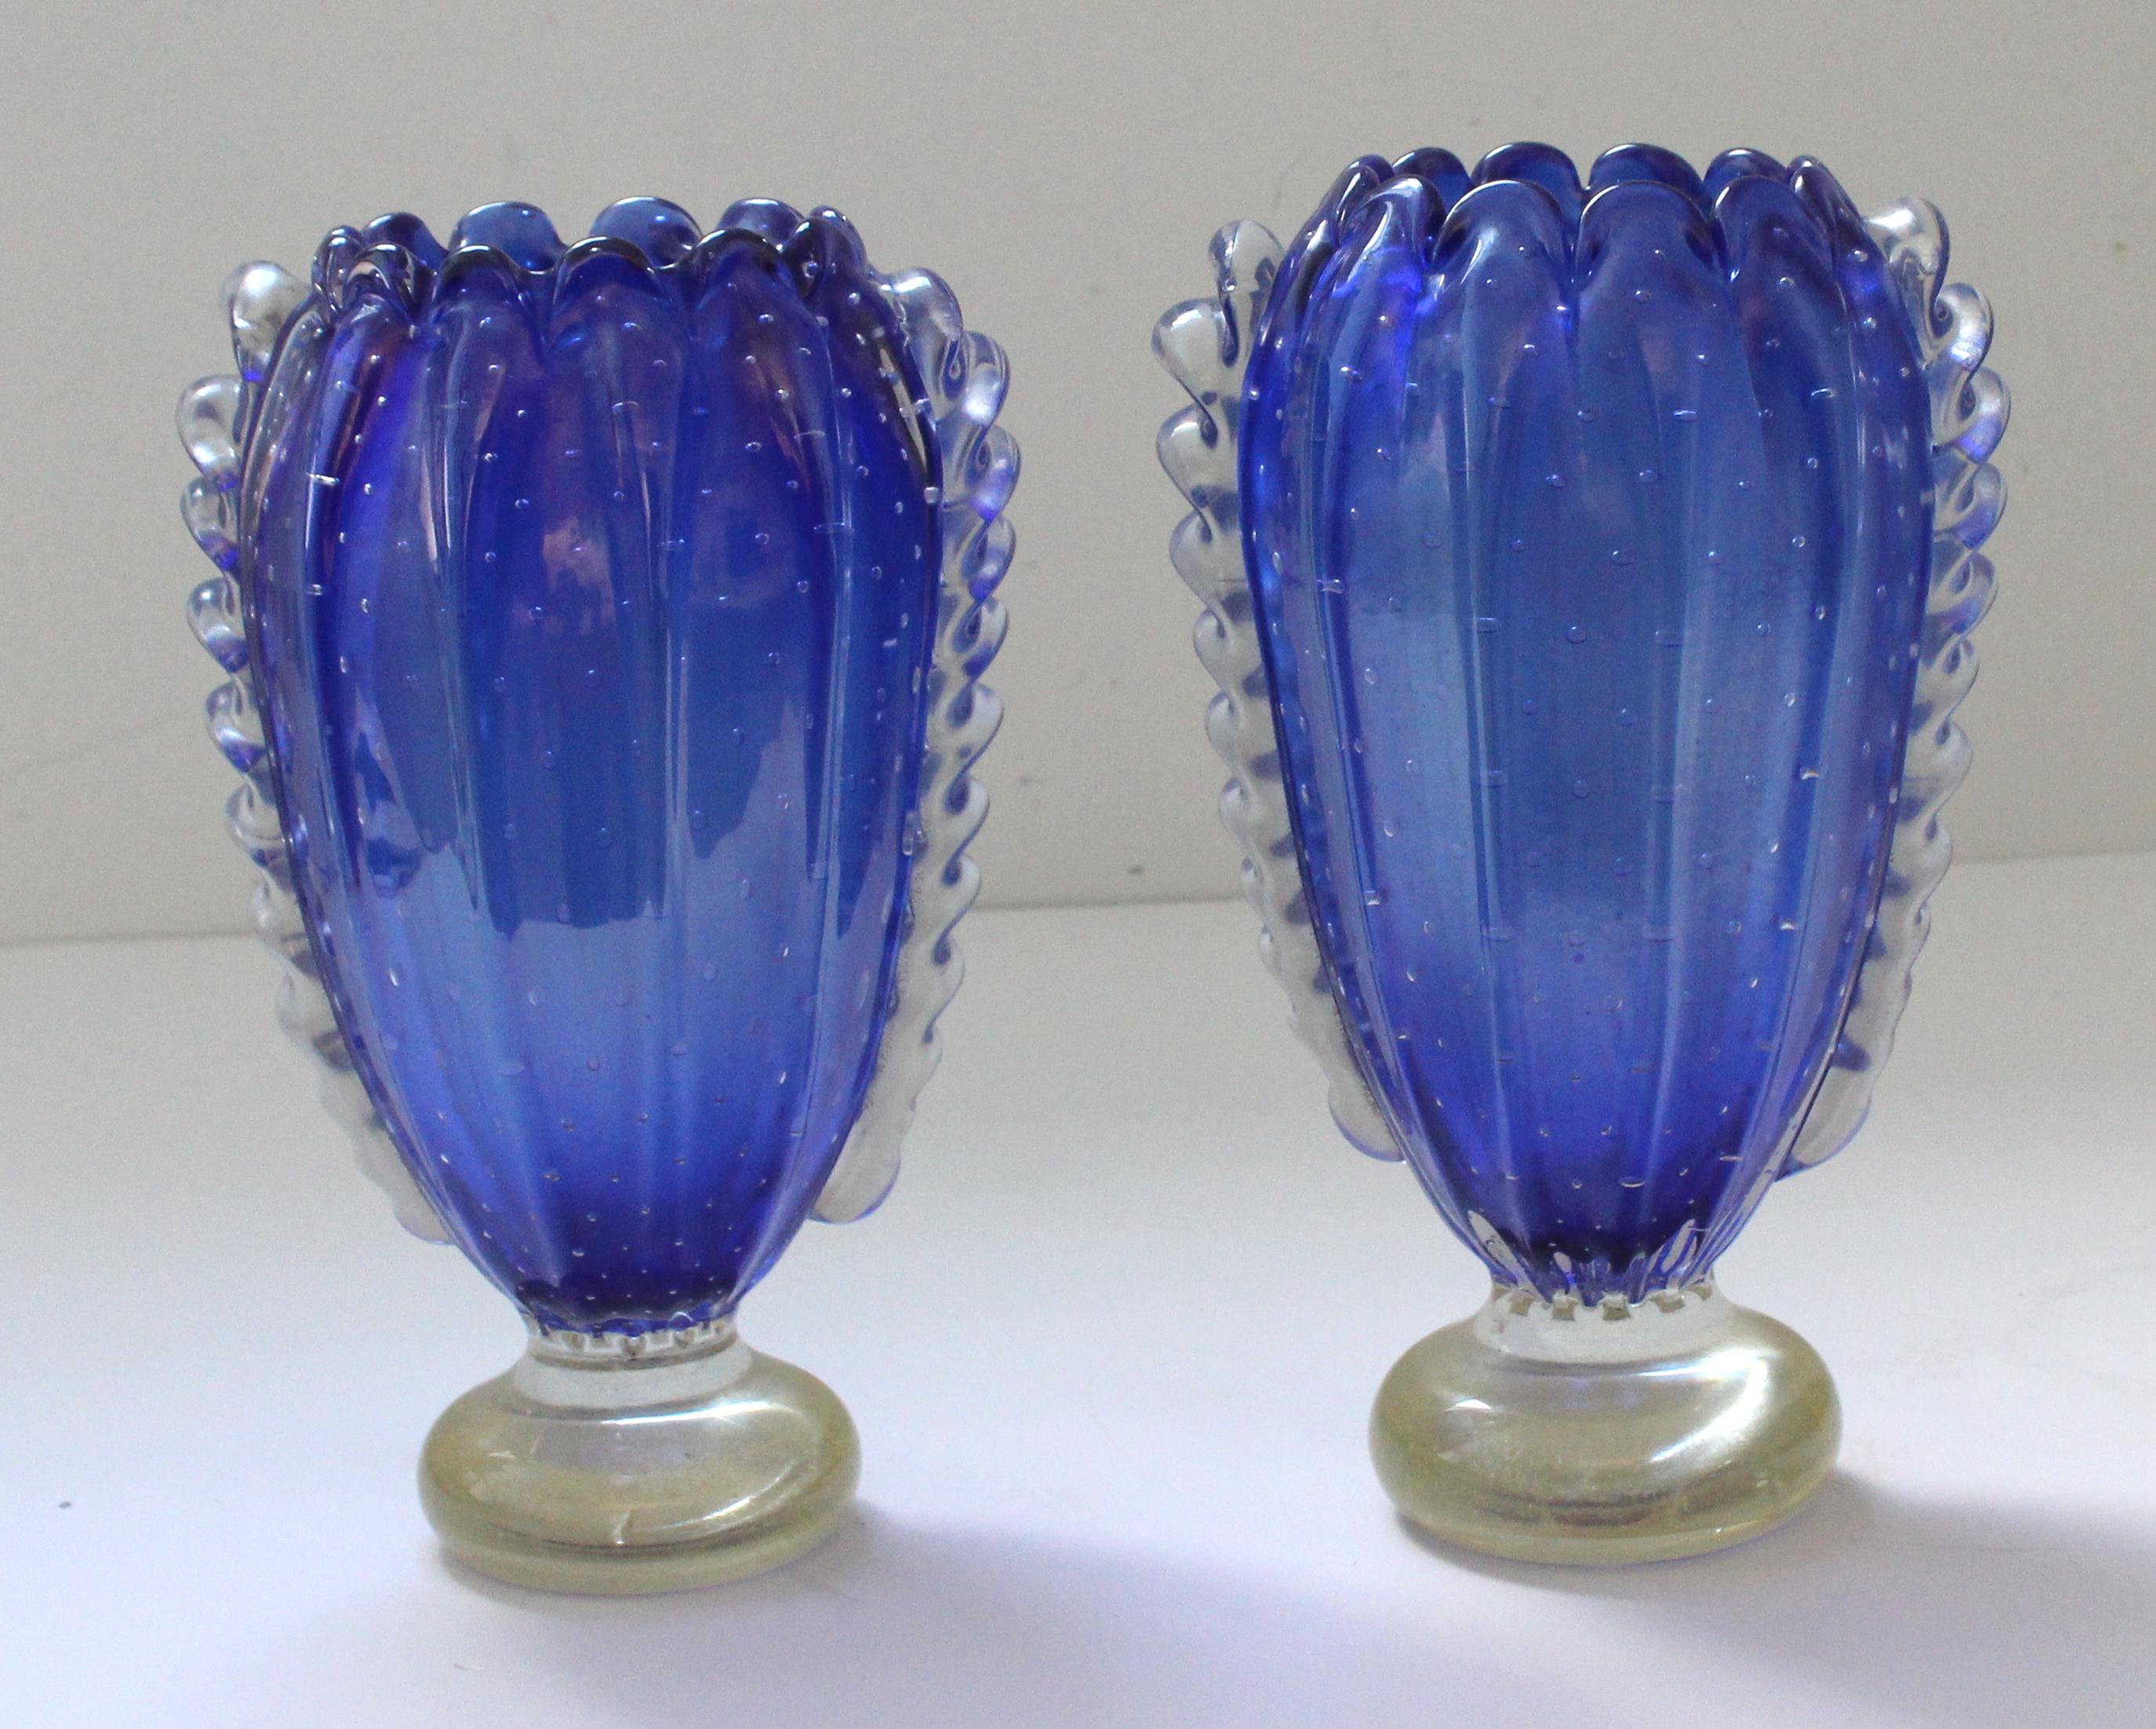 This stylish pair of Murano glass Barovier et Toso vases date to the Art Deco period of the 1920s and 1930s.

Note: Dimensions of one vase are 10.75